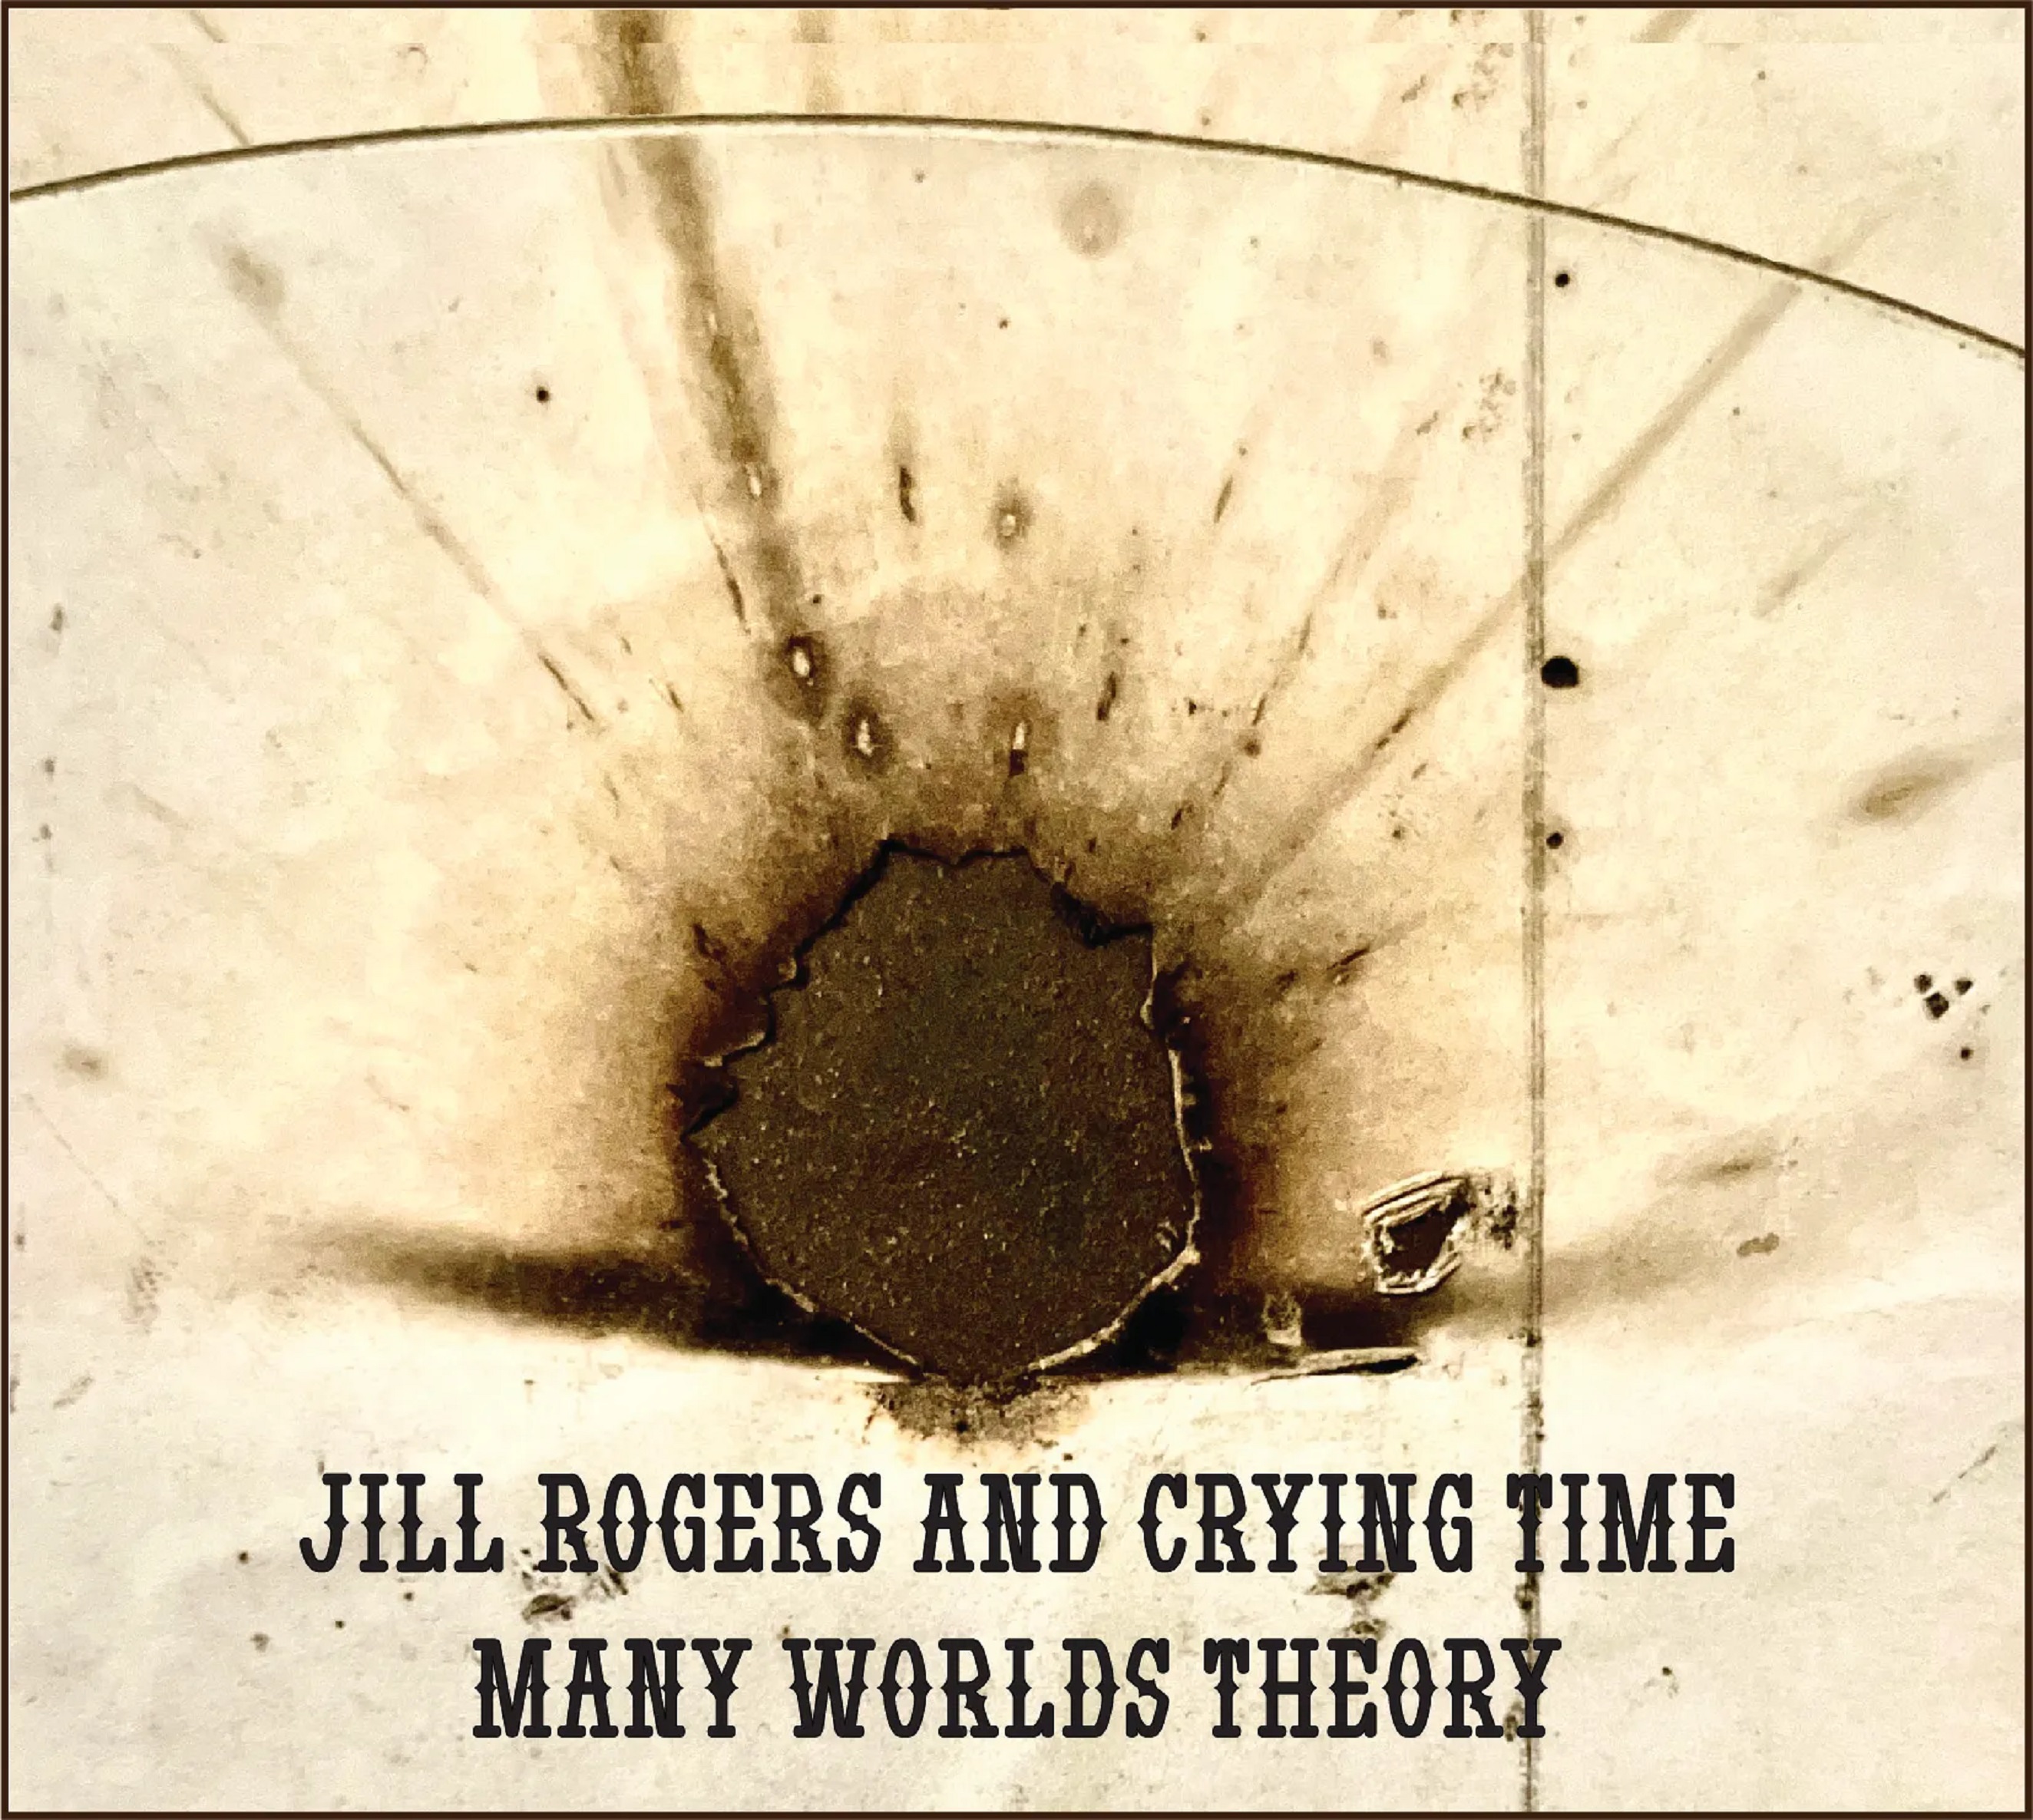 JILL ROGERS AND CRYING TIME RELEASE MANY WORLDS THEORY (APRIL 7, 2023)